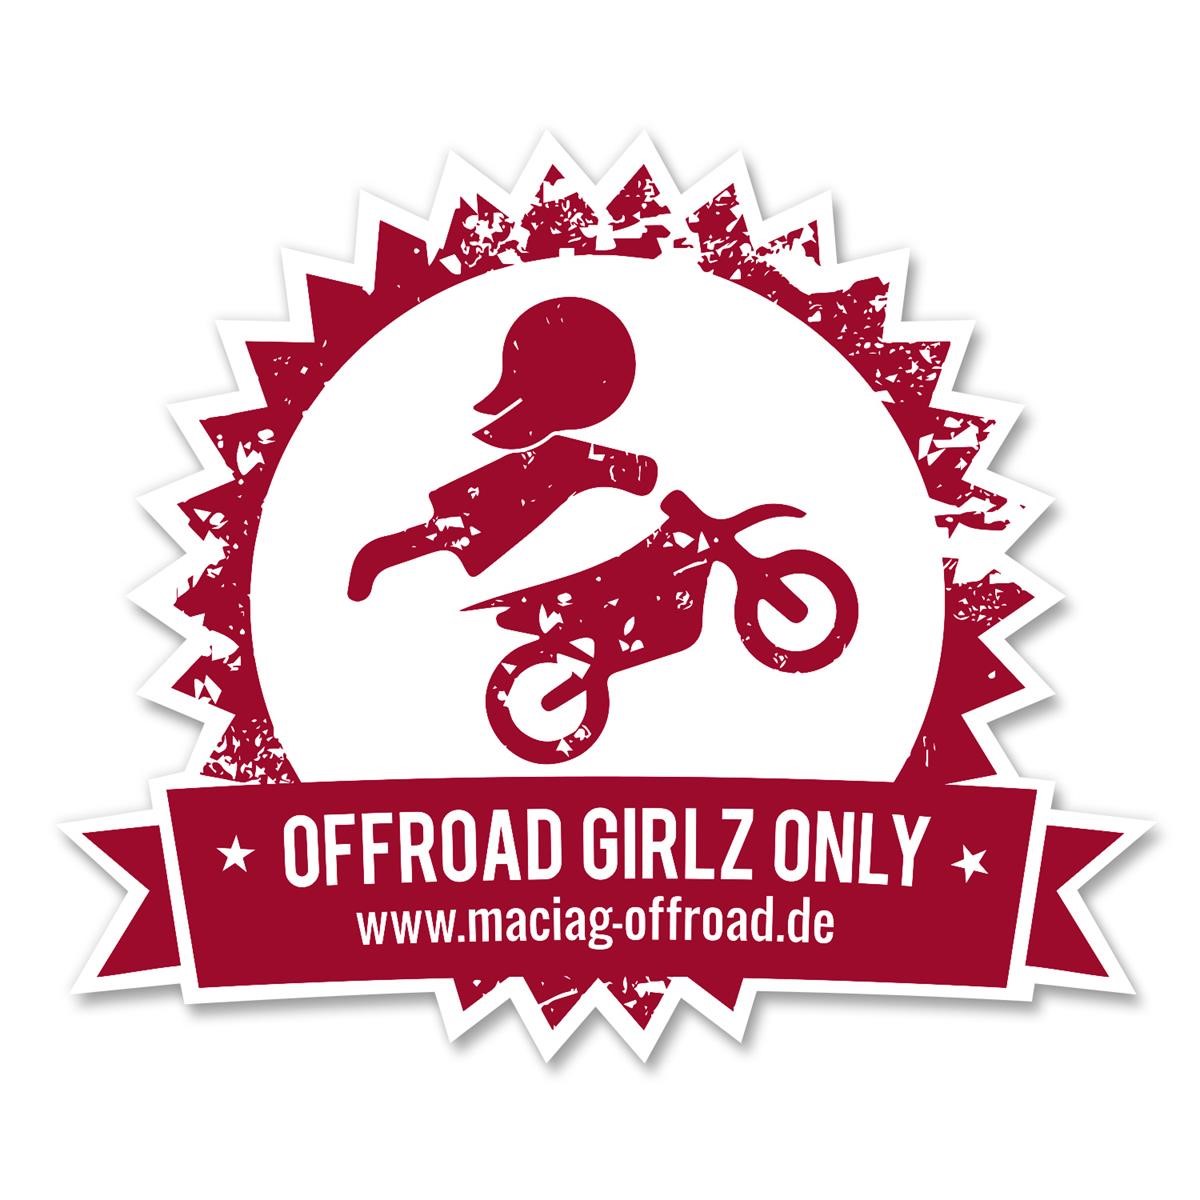 Maciag Offroad "Adesivo ""Offroad Girlz Only"""  Red - 4.5 cm